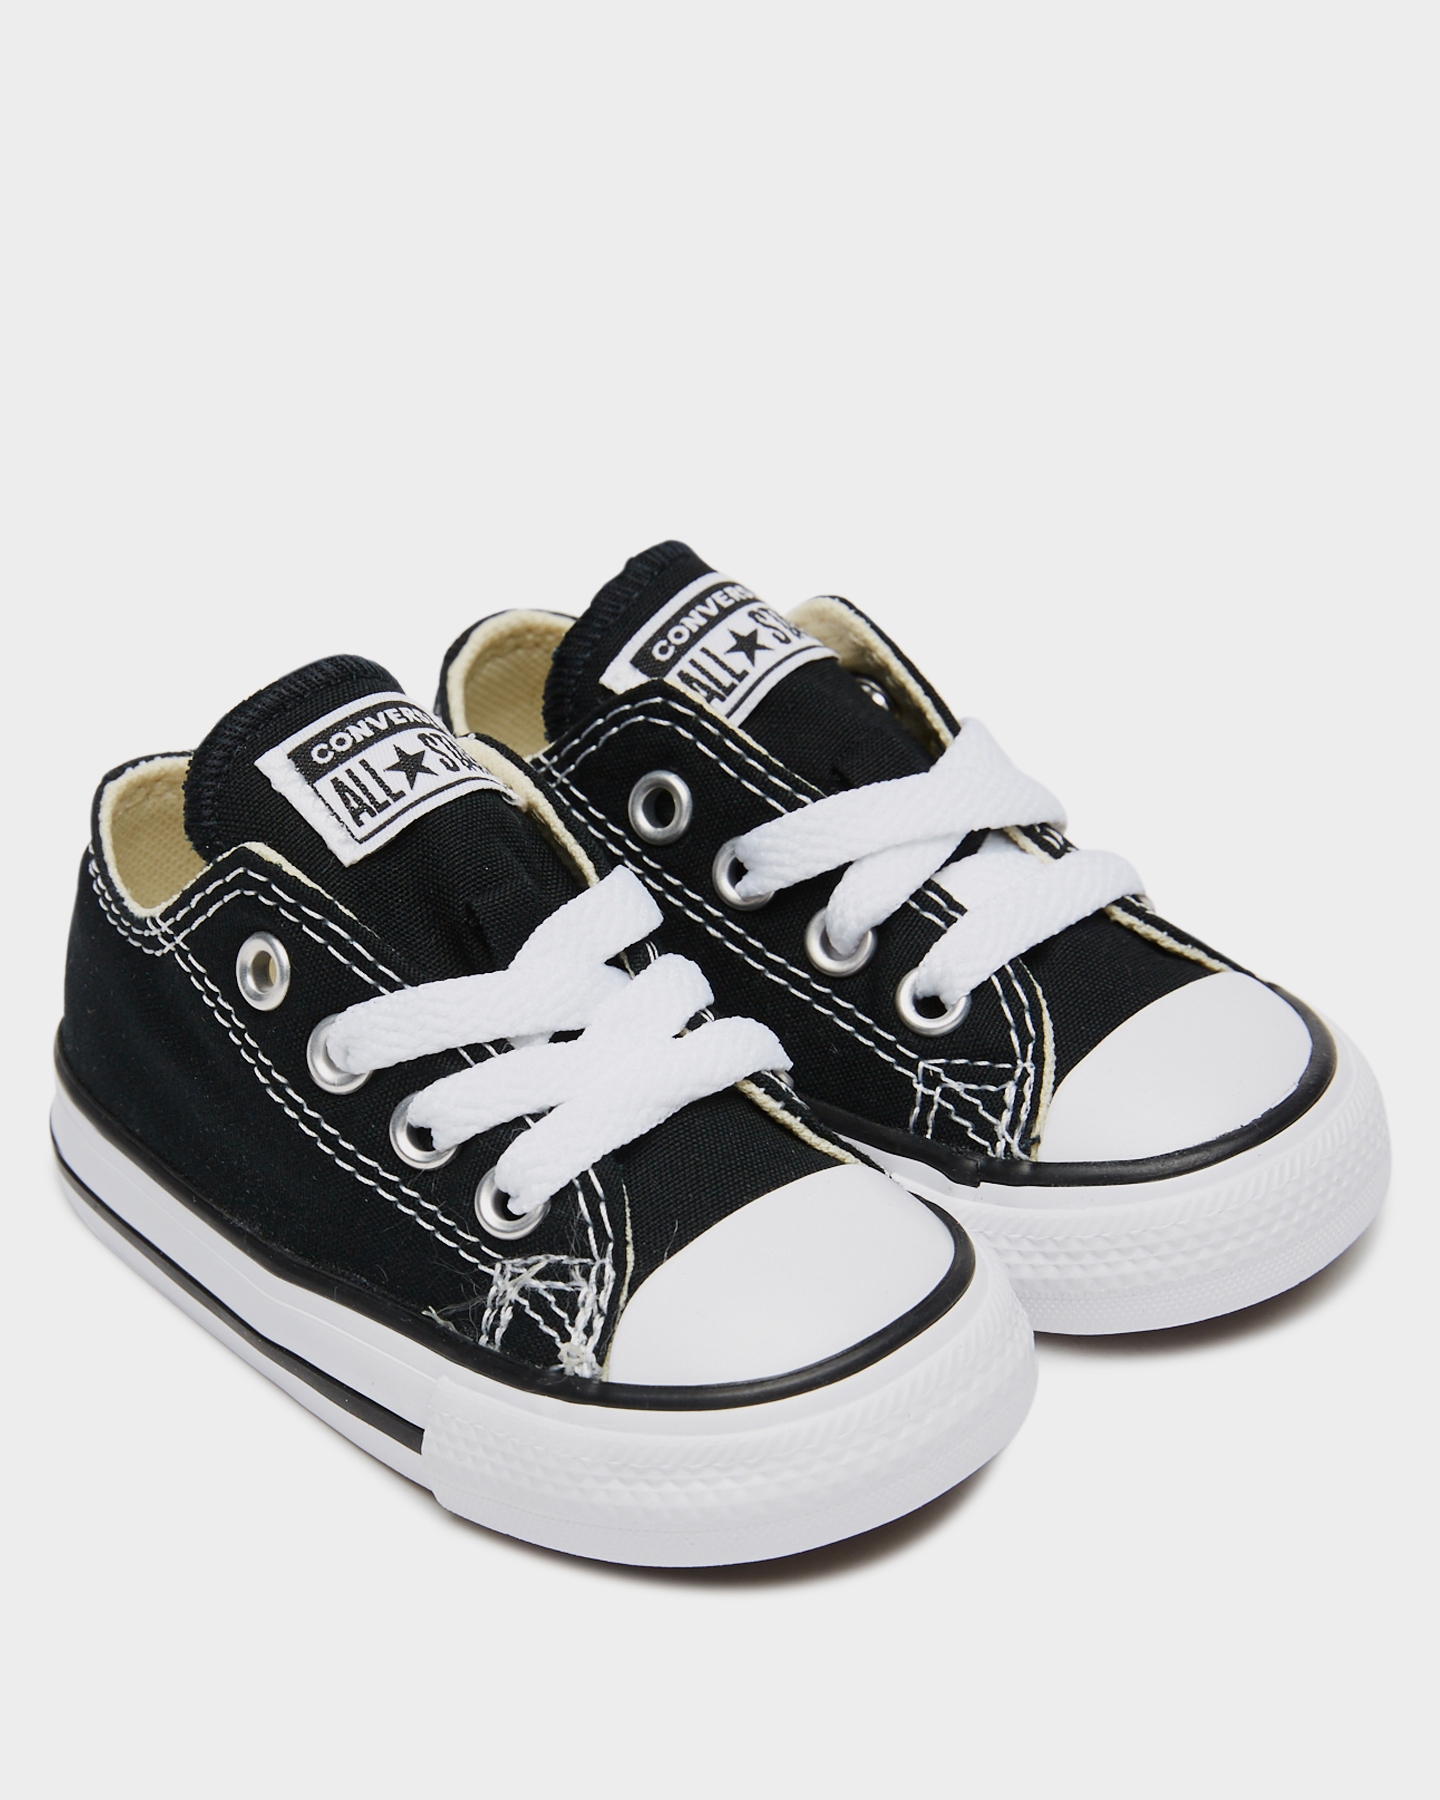 Converse Chuck Taylor All Star Lo Shoe - Toddler - Black | SurfStitch